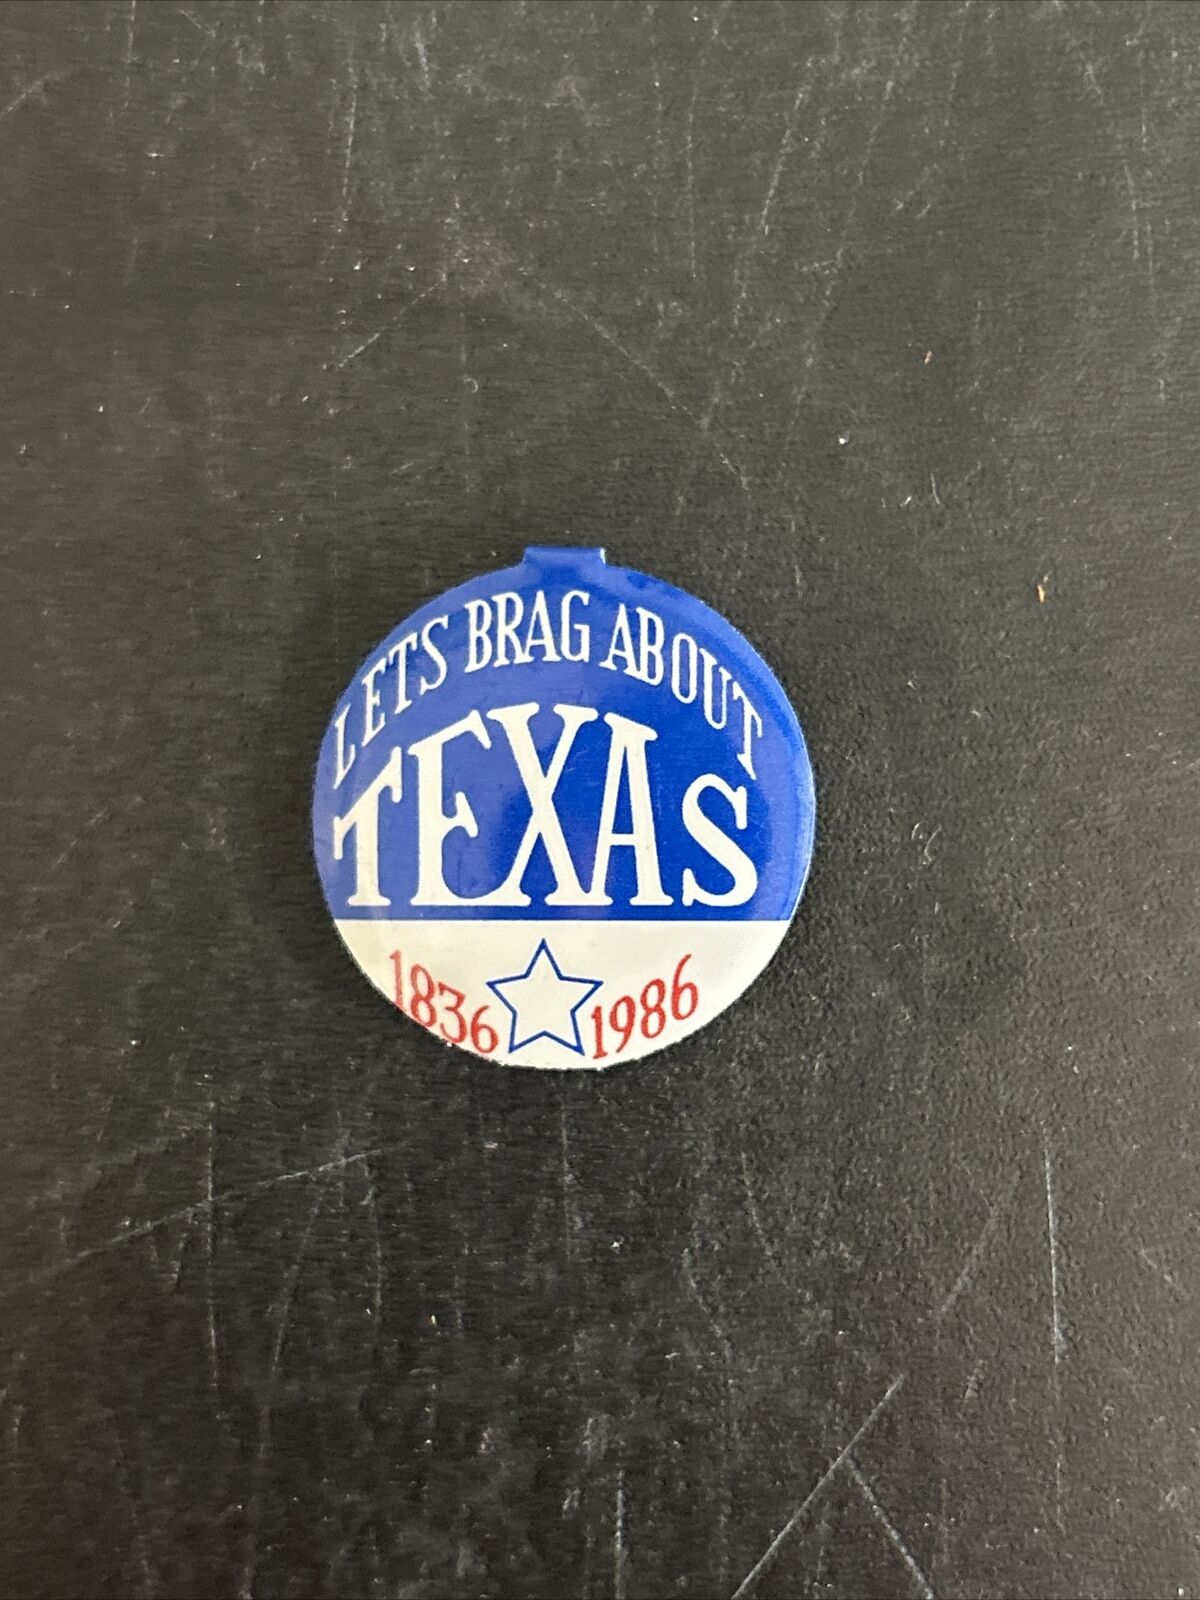 Let’s Brag About Texas Sesquicentennial Pin 1836-1986